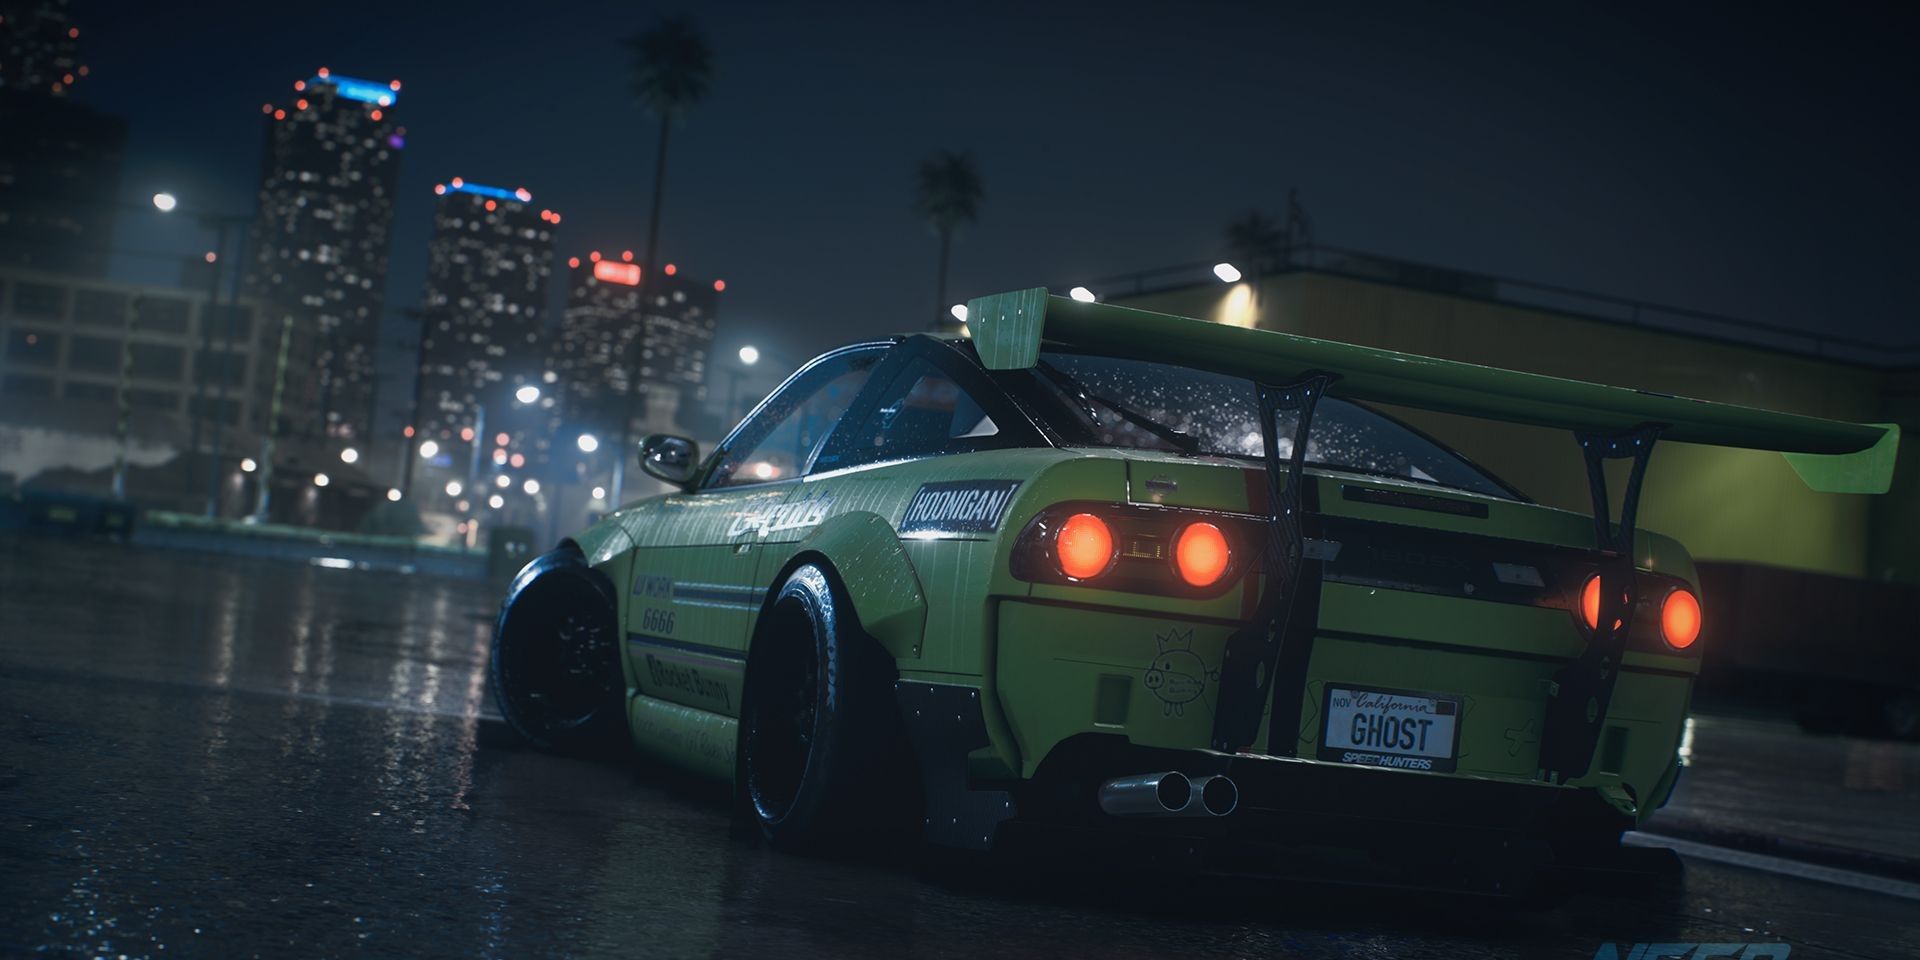 Need for Speed Reboot